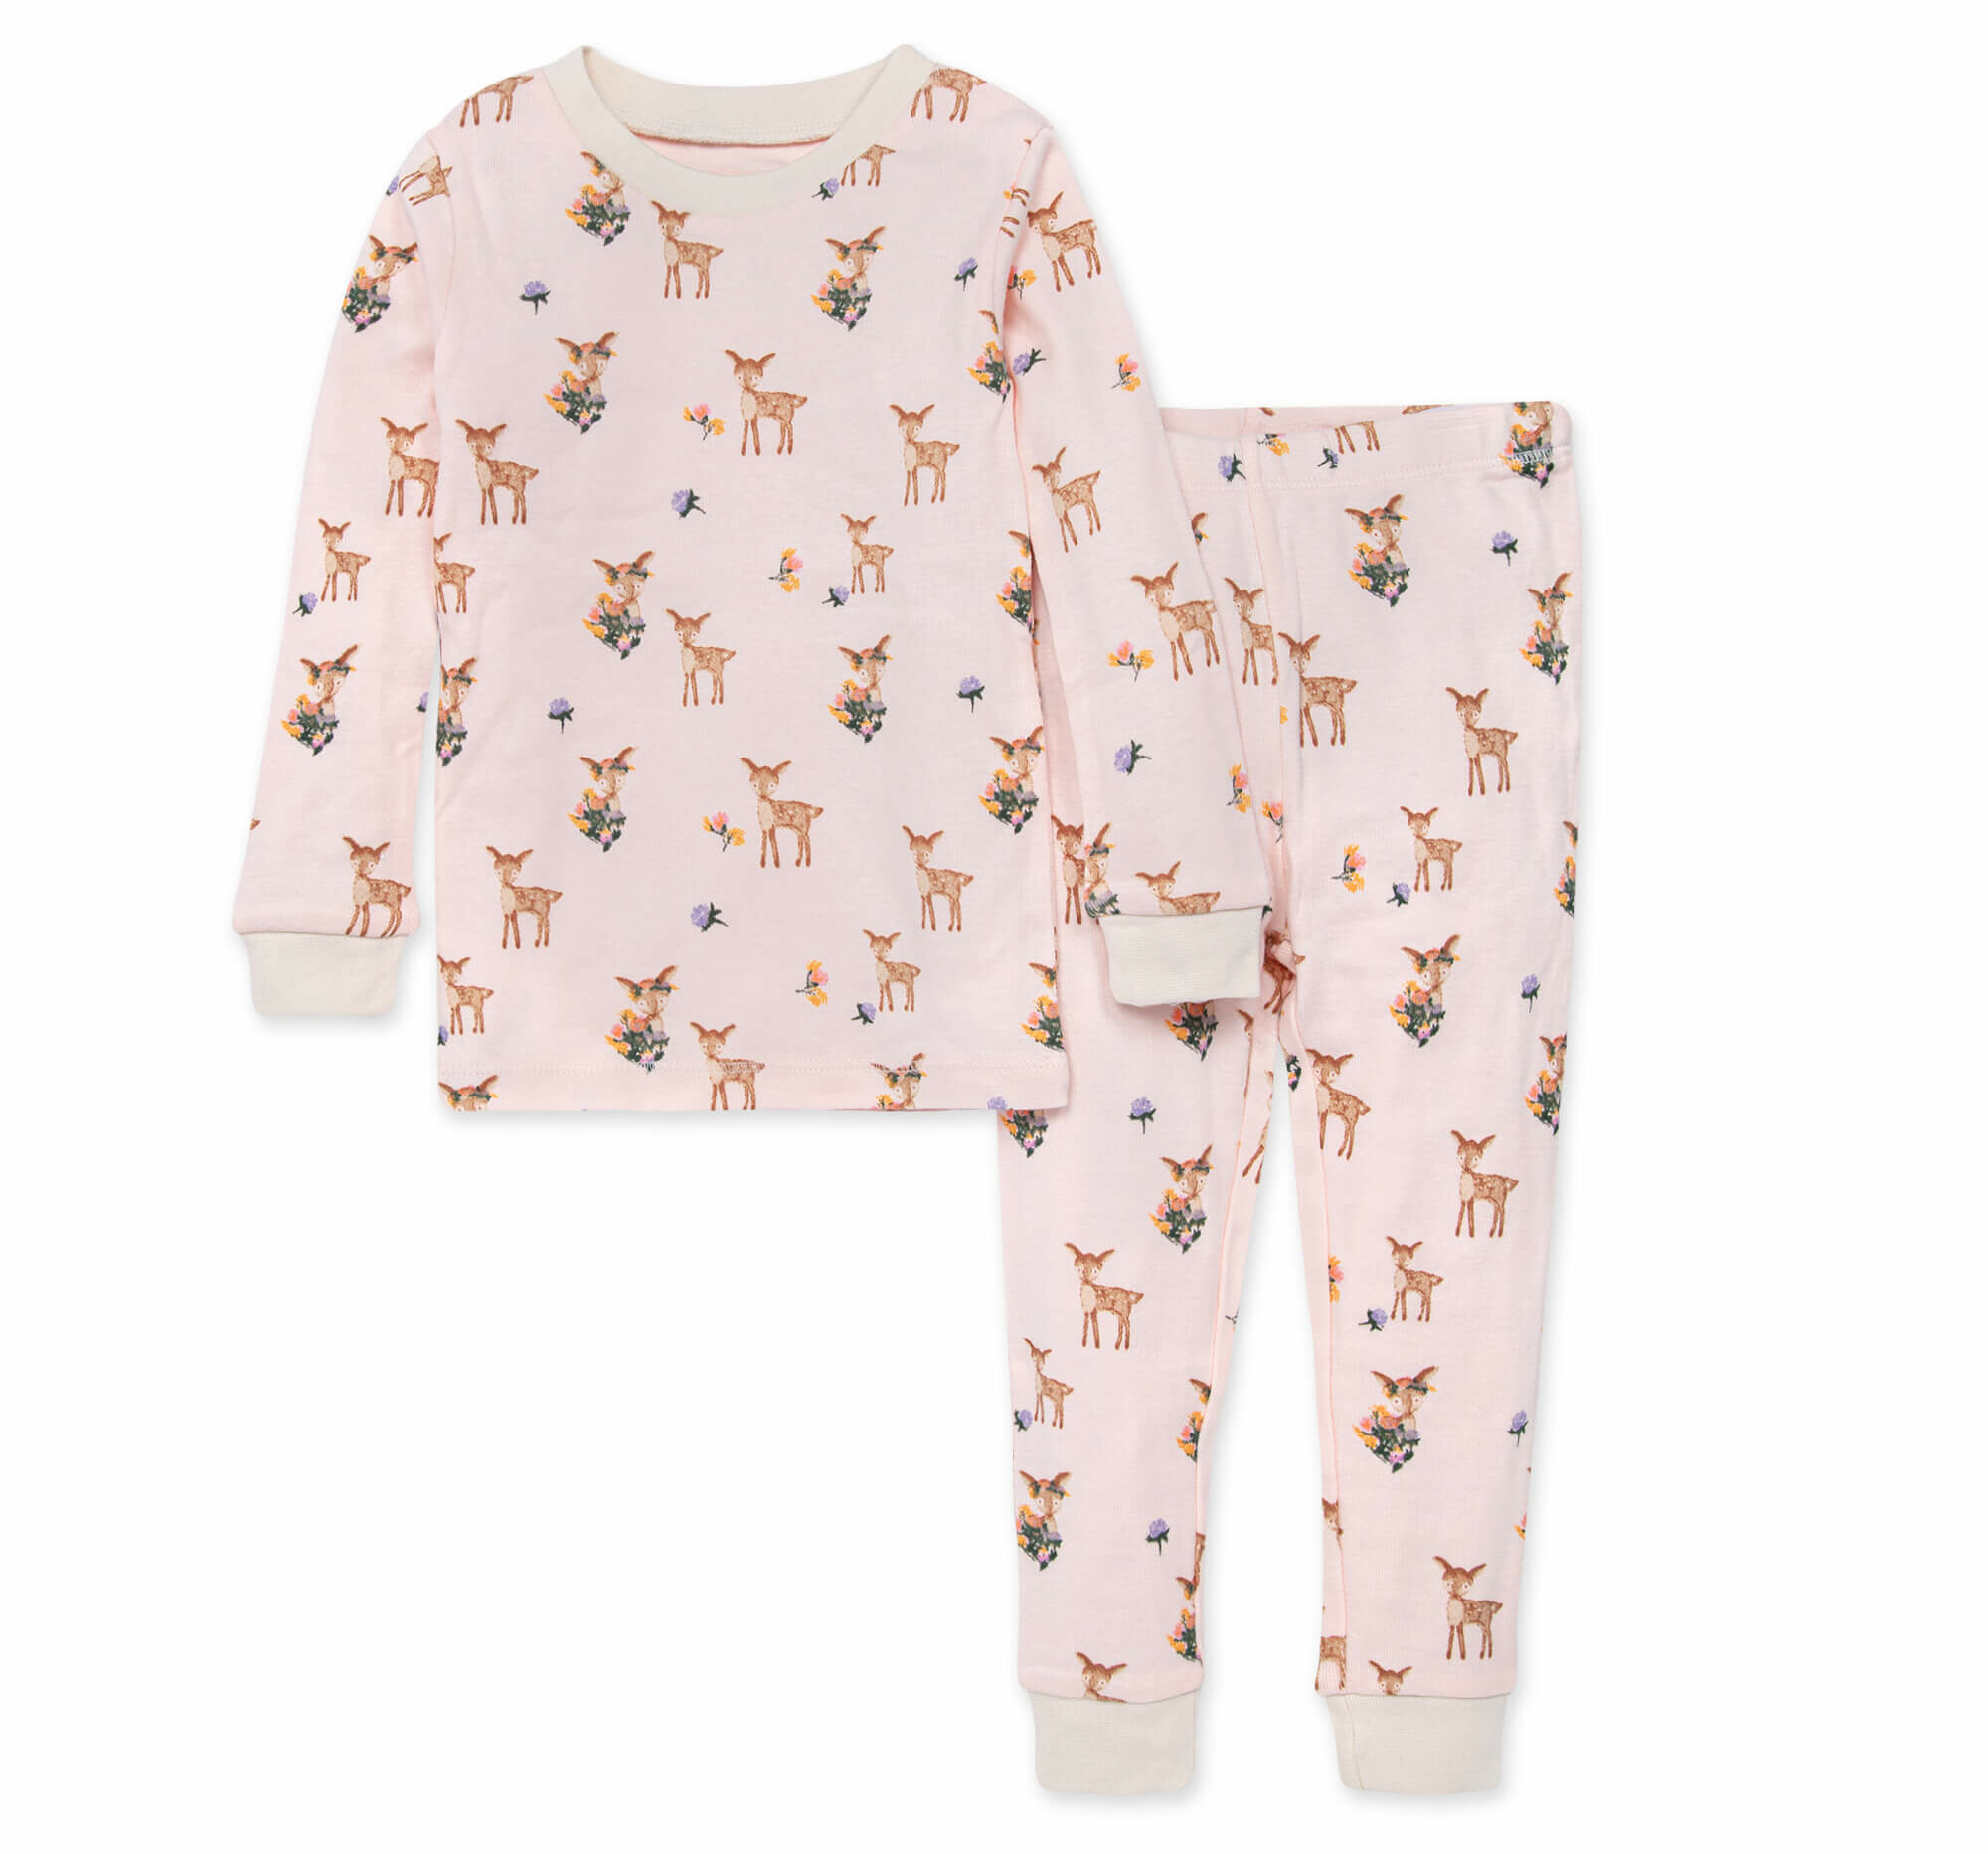 30 Best Pajamas for Toddlers and Kids